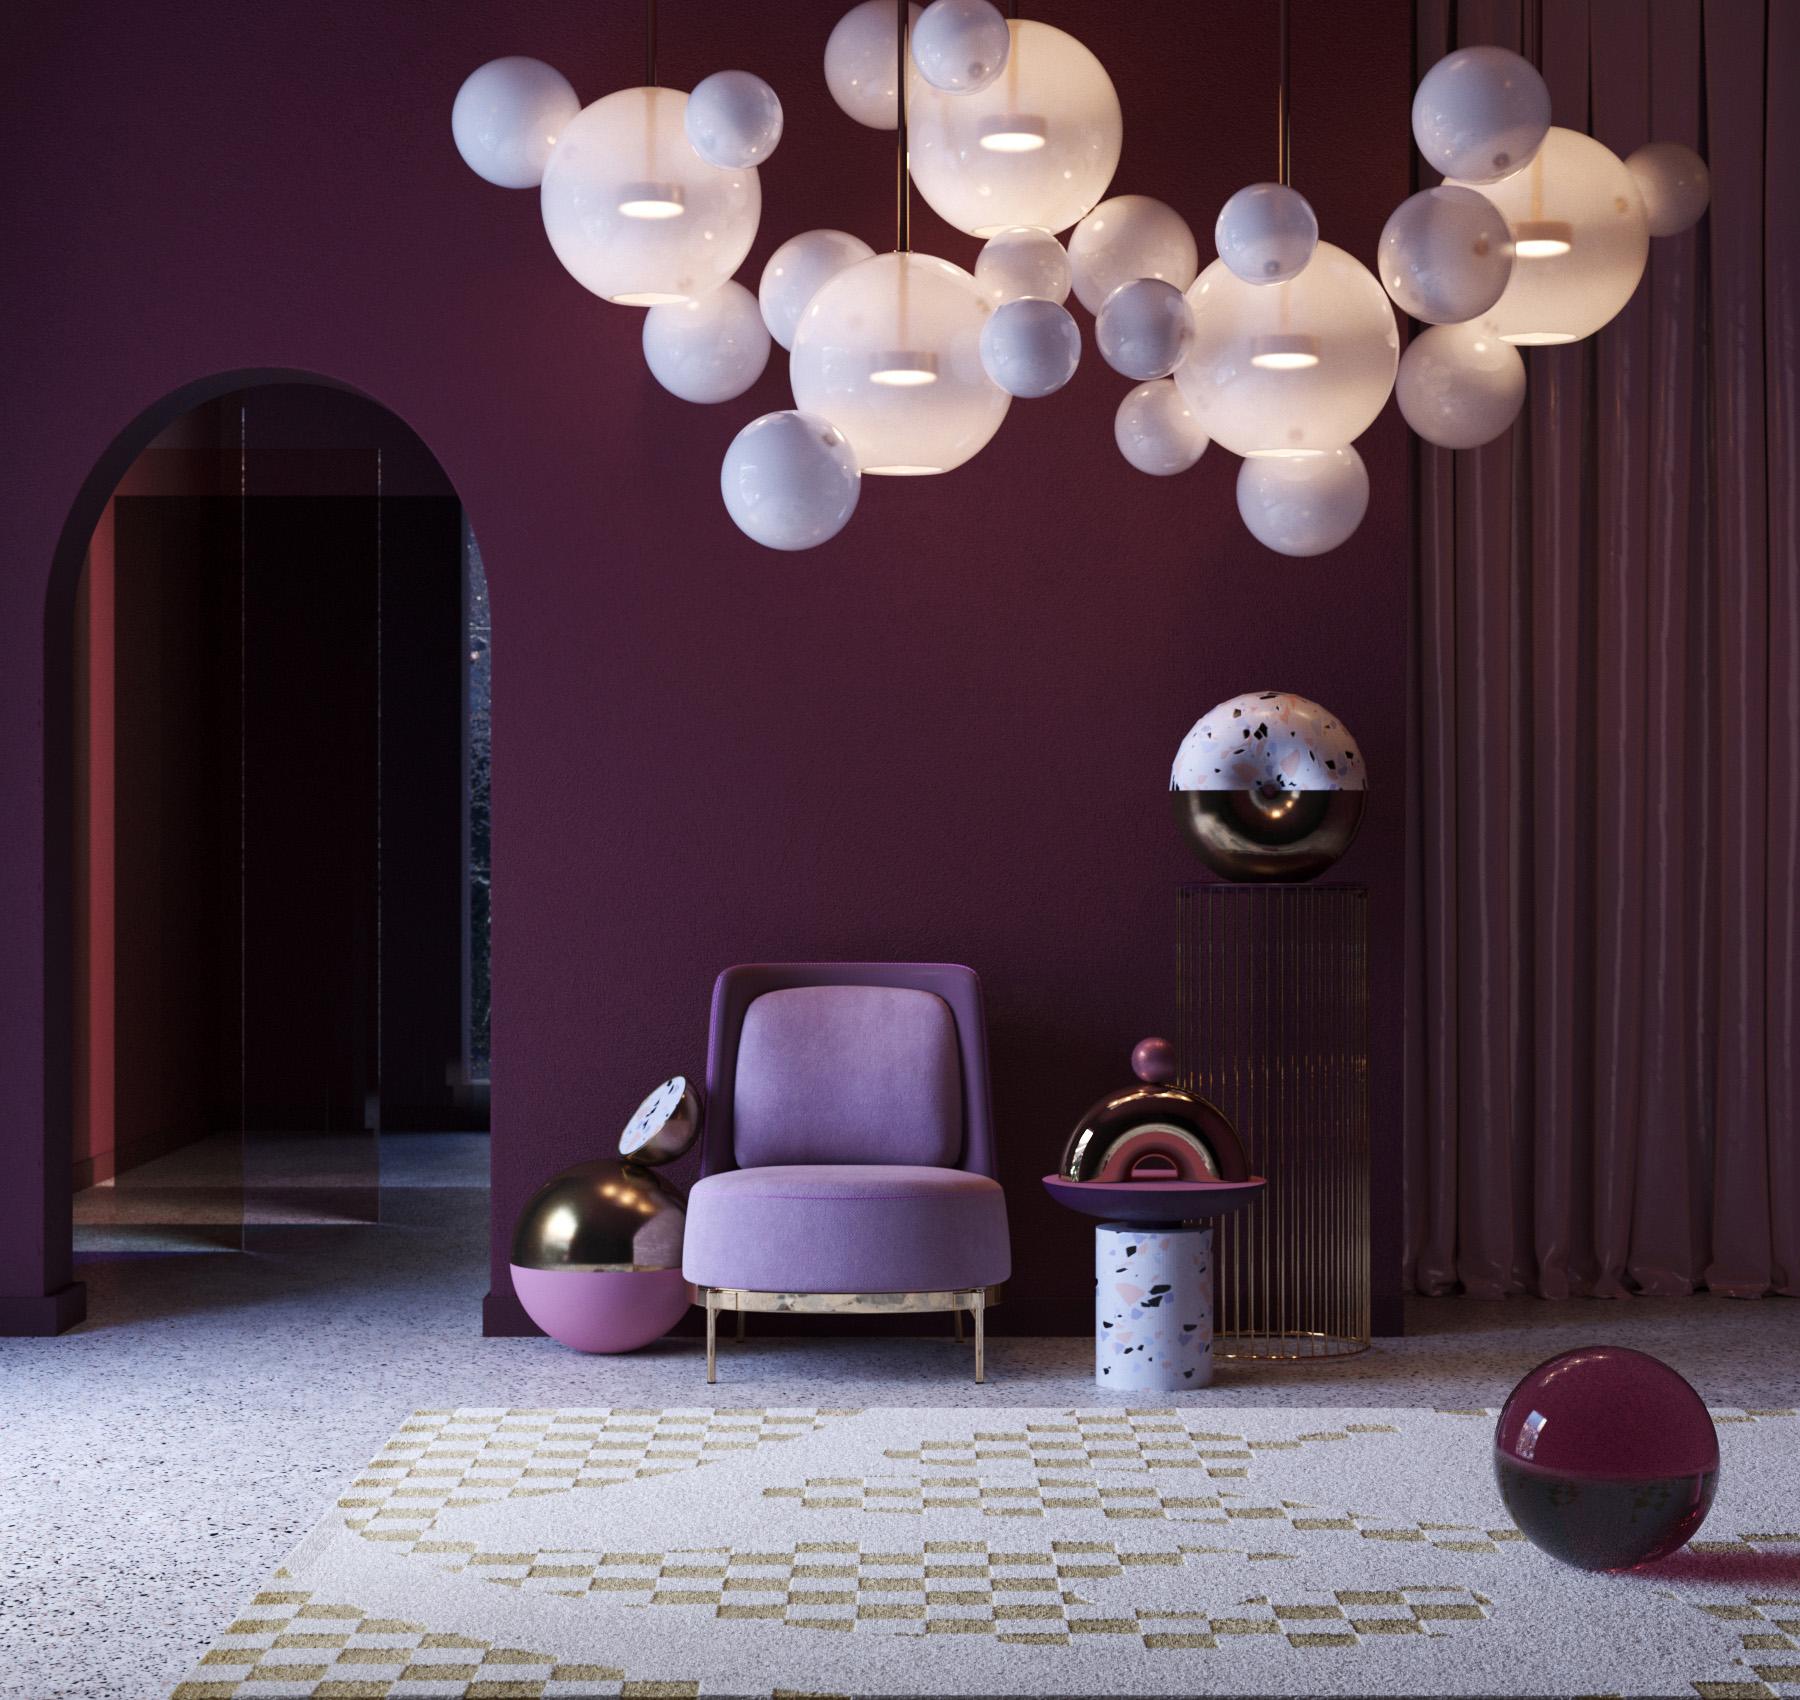 Free virtual rug fitting - just send us pics of your interior and we suggest you the best designs, shapes, sizes and colors.

Ambiance is an experimental, graphic collection, which serves as the aesthetic core of our brand. Presenting contemporary